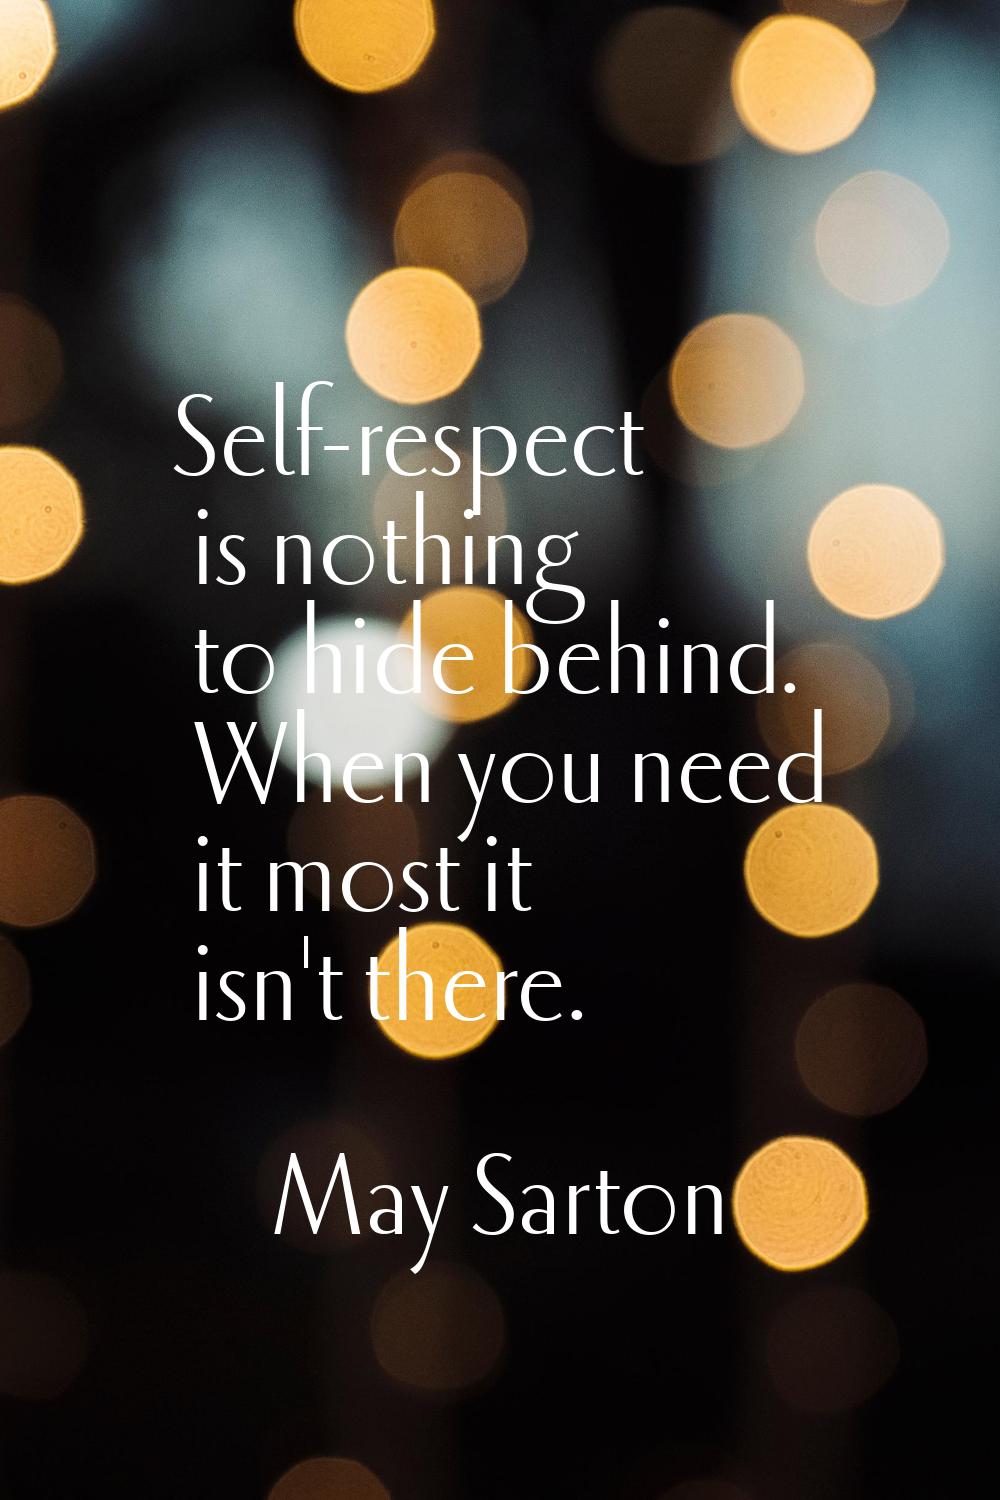 Self-respect is nothing to hide behind. When you need it most it isn't there.